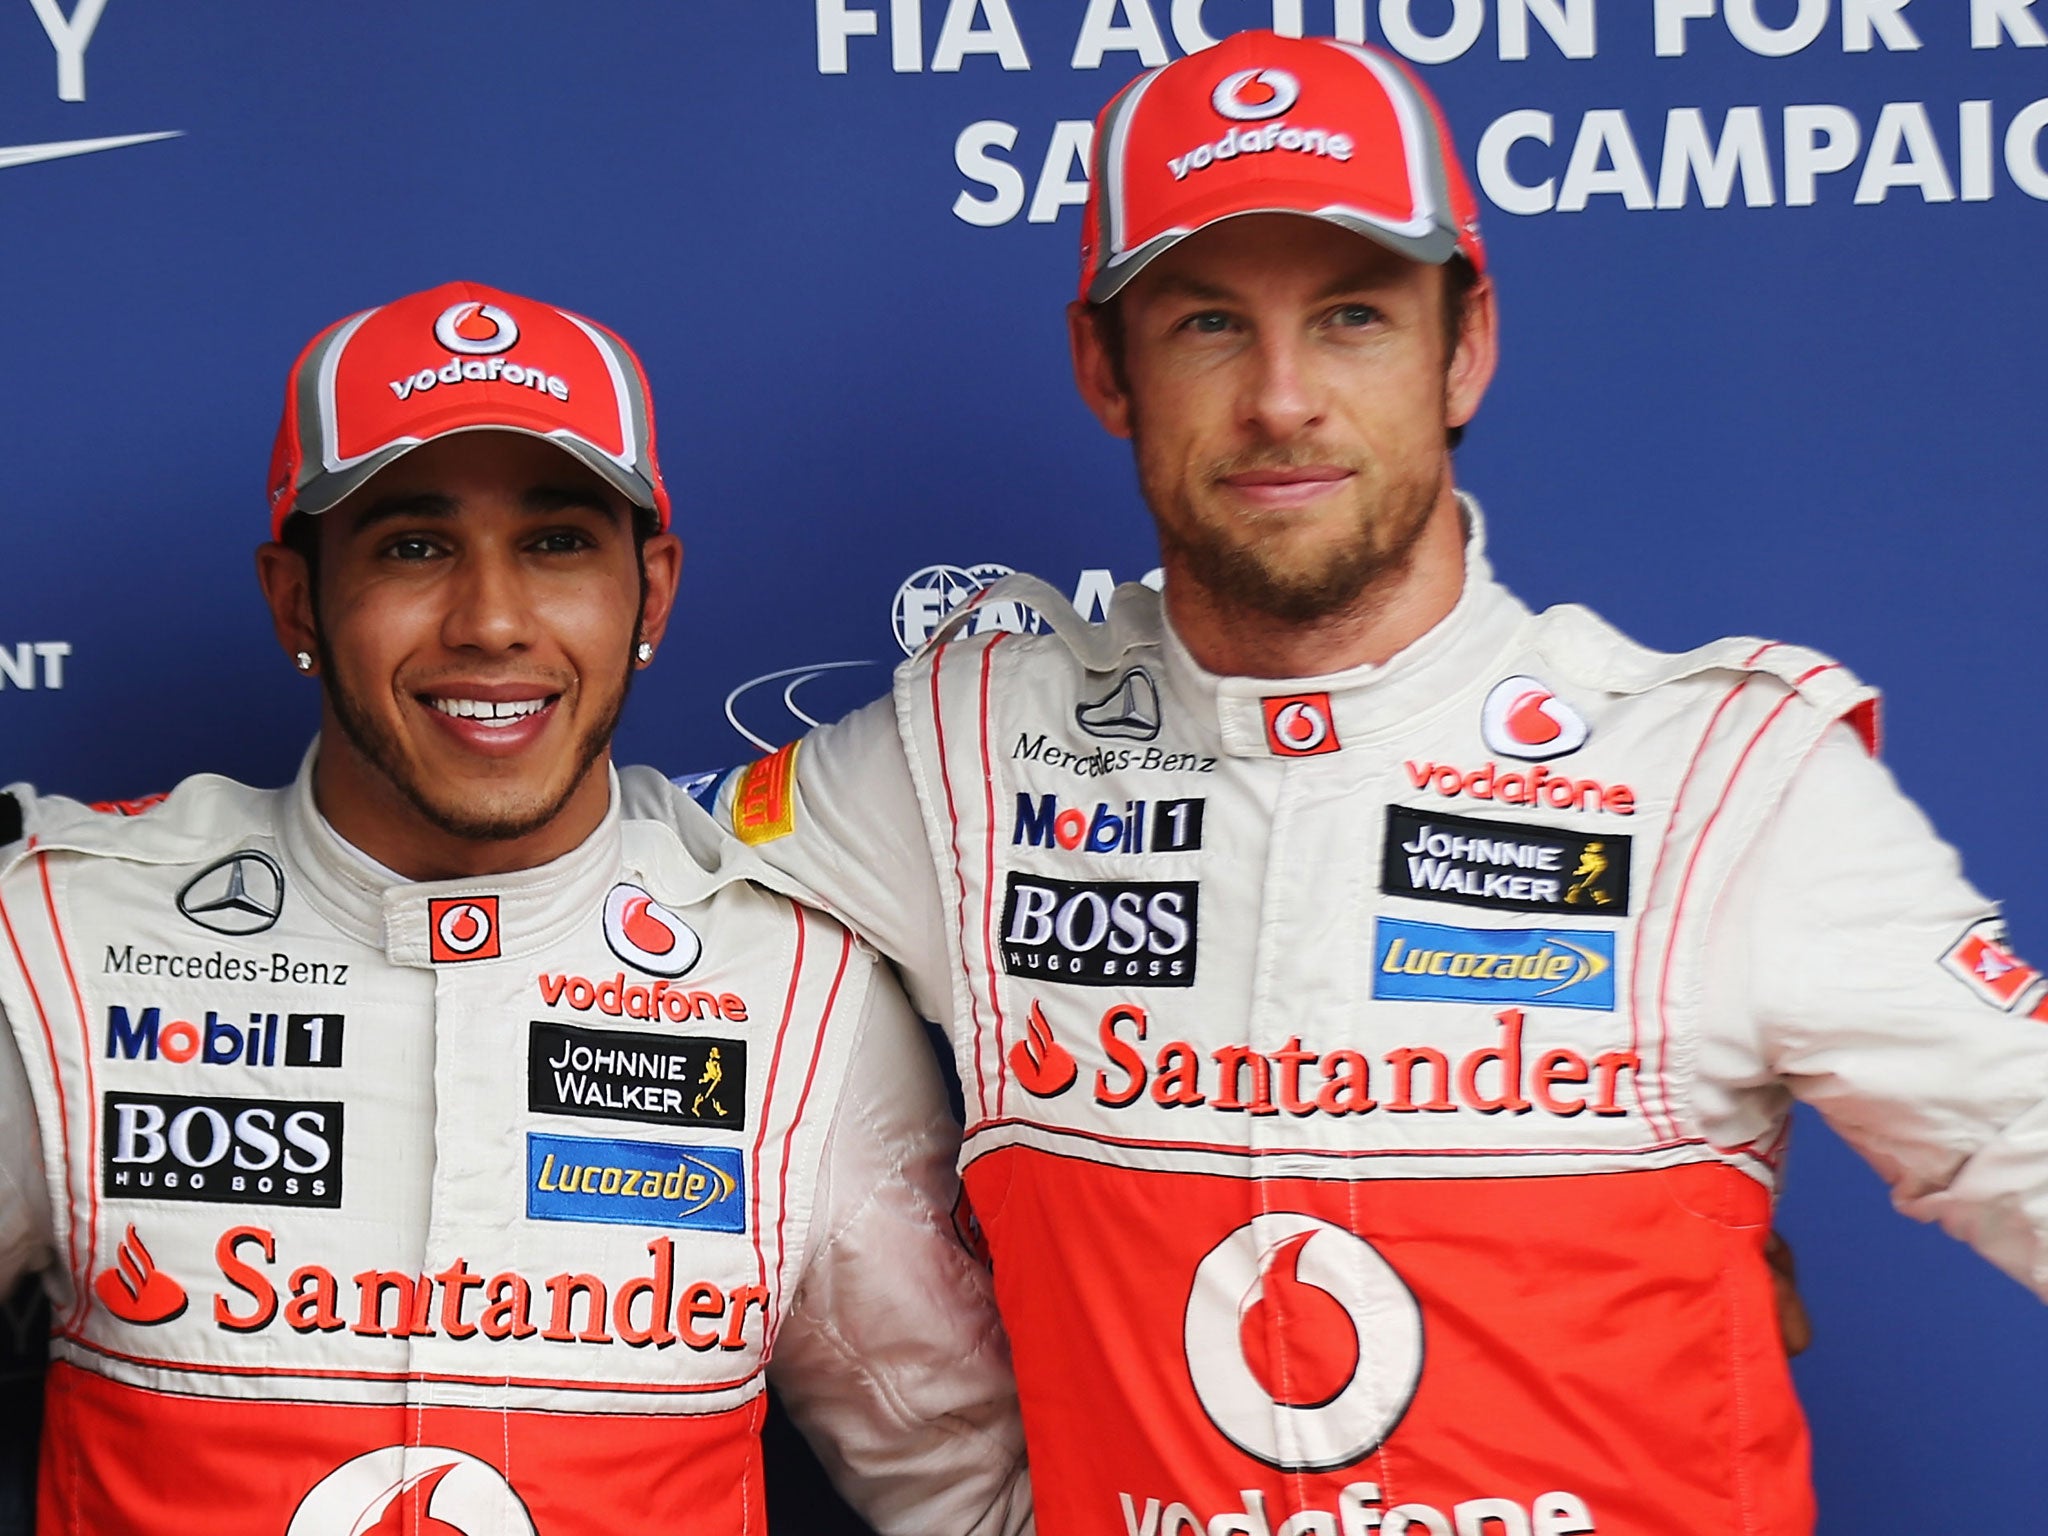 Happier times: Button (r) says Hamilton's comments about McLaren are wrong